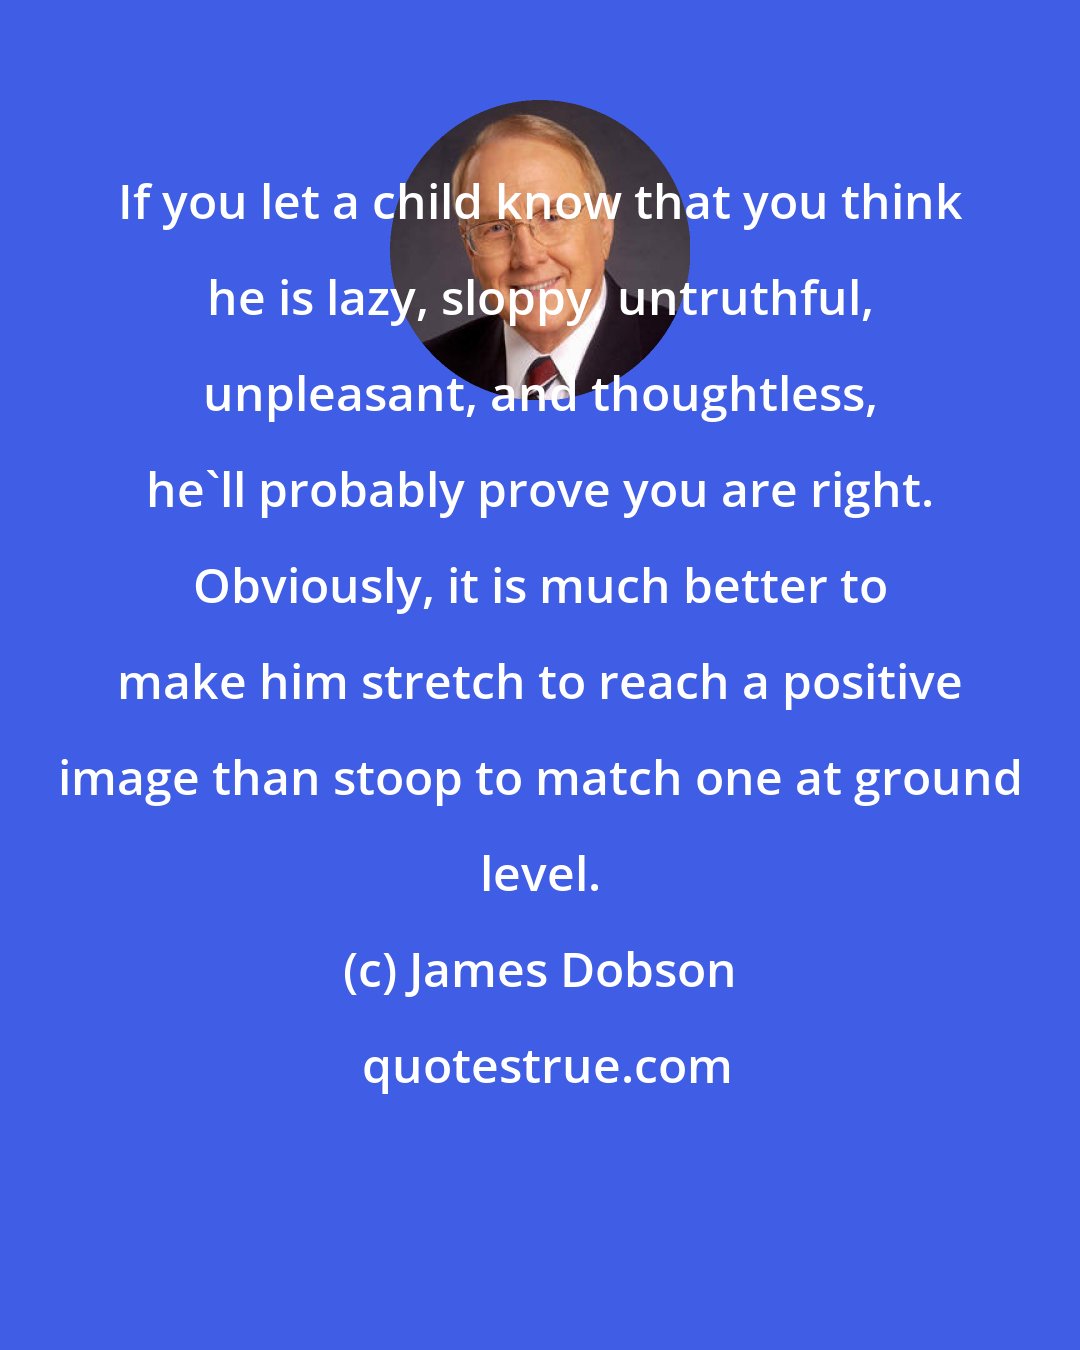 James Dobson: If you let a child know that you think he is lazy, sloppy, untruthful, unpleasant, and thoughtless, he'll probably prove you are right. Obviously, it is much better to make him stretch to reach a positive image than stoop to match one at ground level.